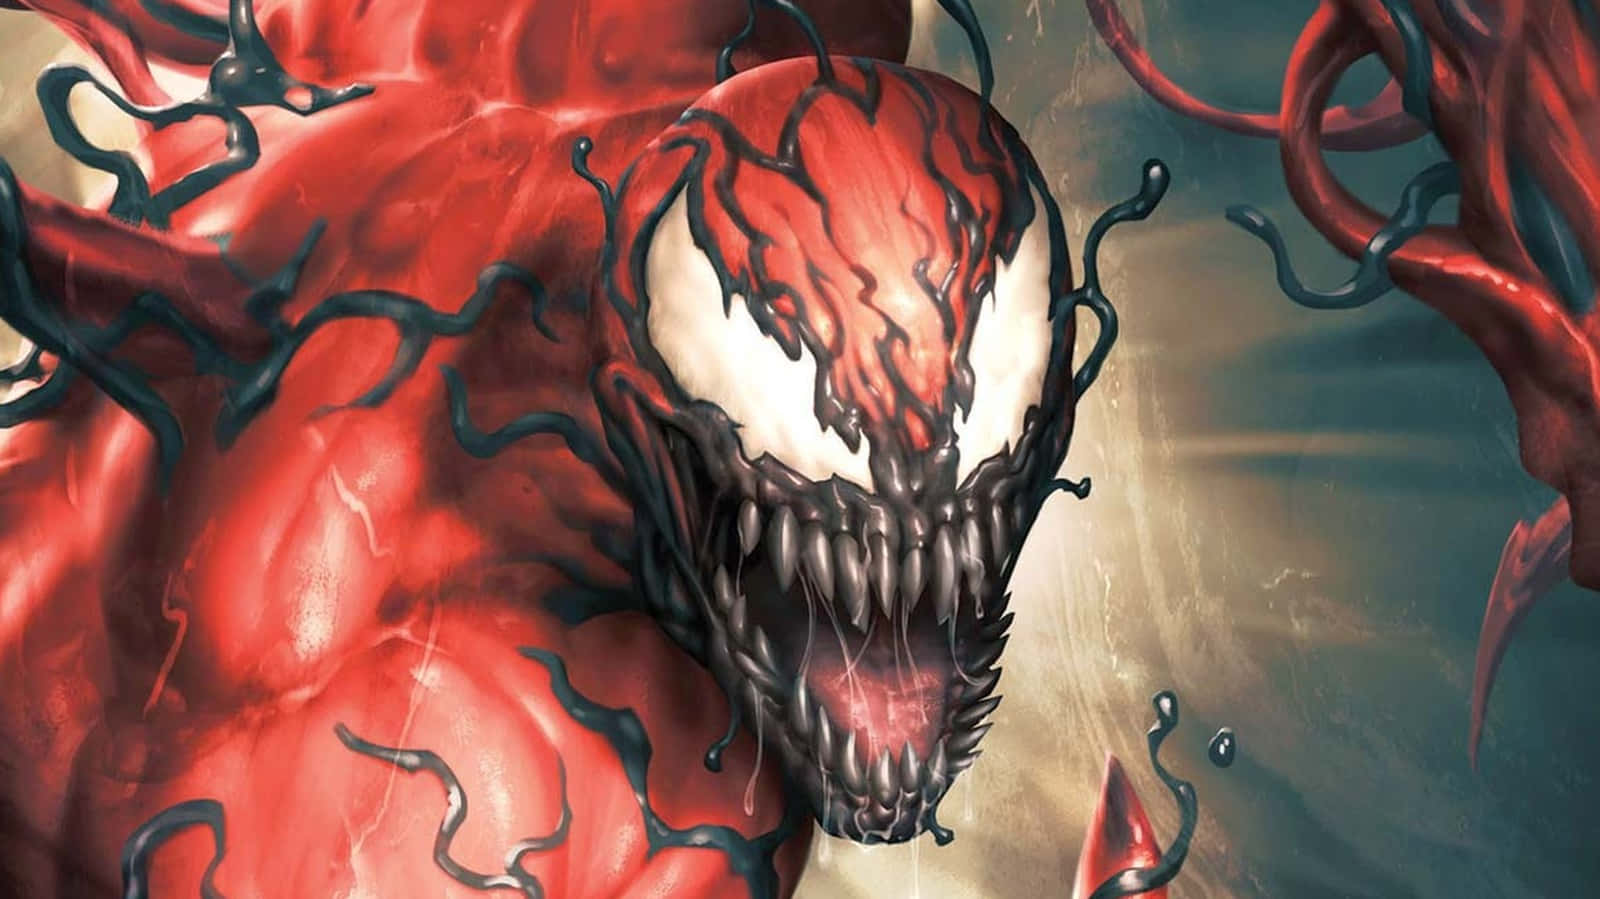 Cletus Kasady as Carnage, a powerful Marvel supervillain Wallpaper